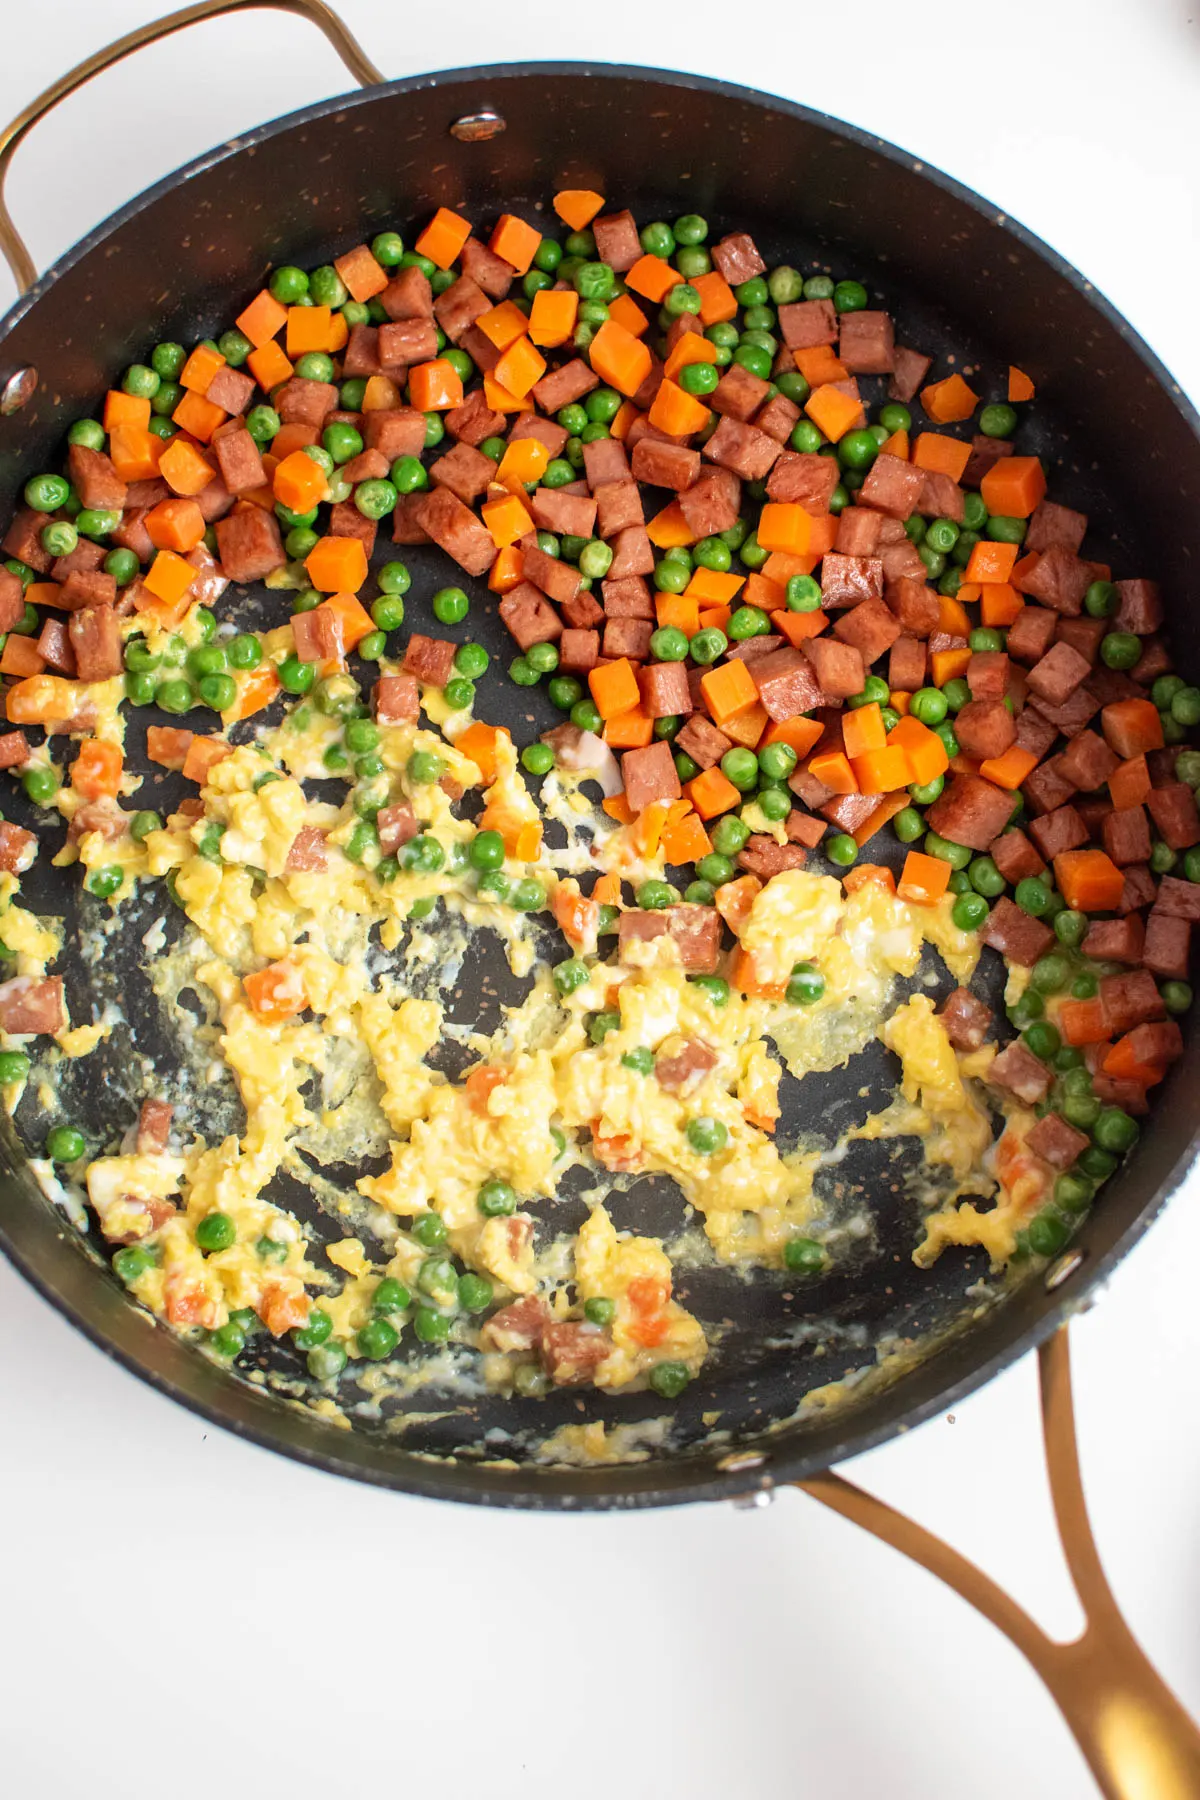 Partially cooked egg and small pieces of Spam, peas, and carrots in large black skillet.